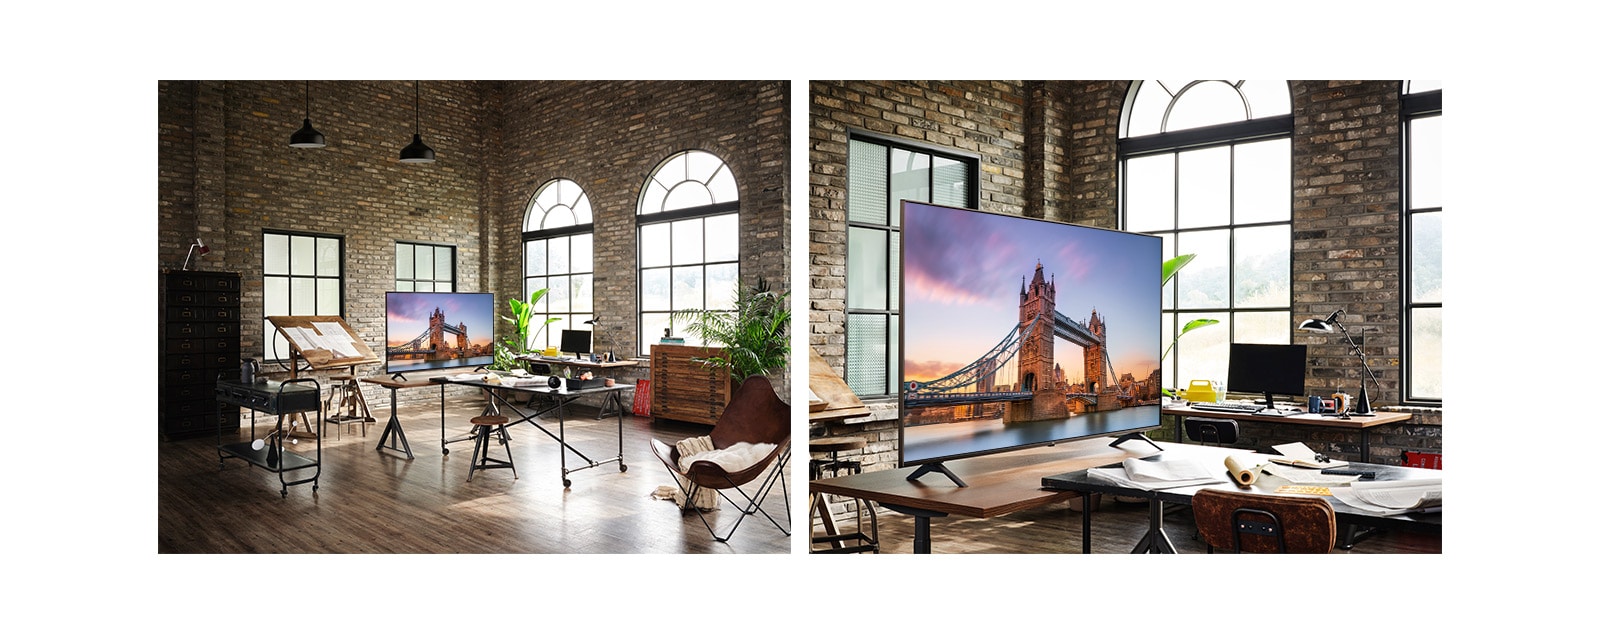 "A TV displaying a picture of London Bridge is in an antique workroom. A close up of a TV displaying a picture of London Bridge is on a table in an antique workroom."